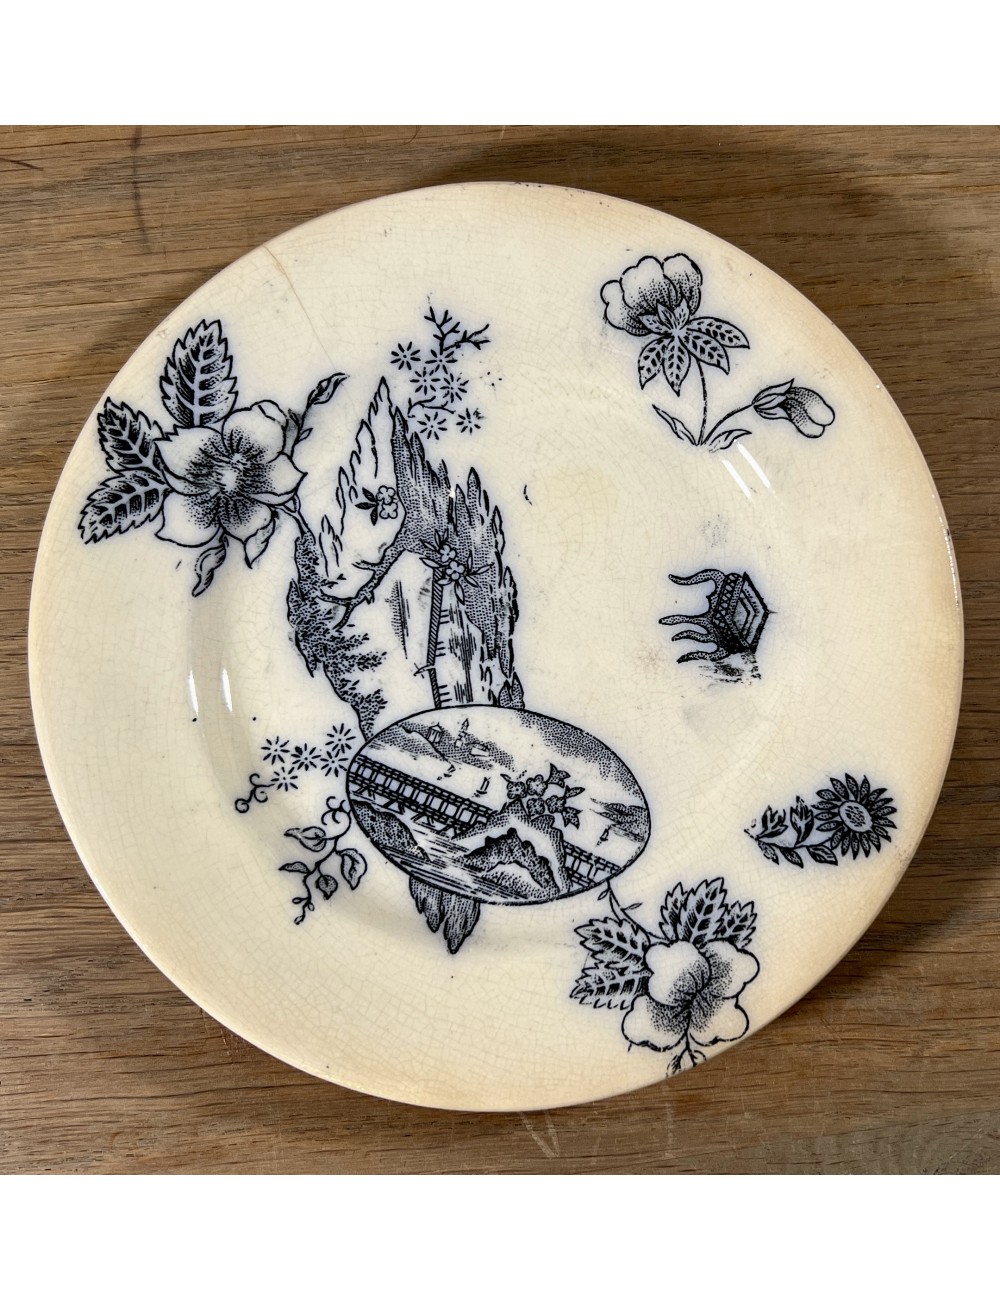 Breakfast plate / Dessert plate - small model, children's service - unmarked (probably Nimy) - décor with blossoms and ships